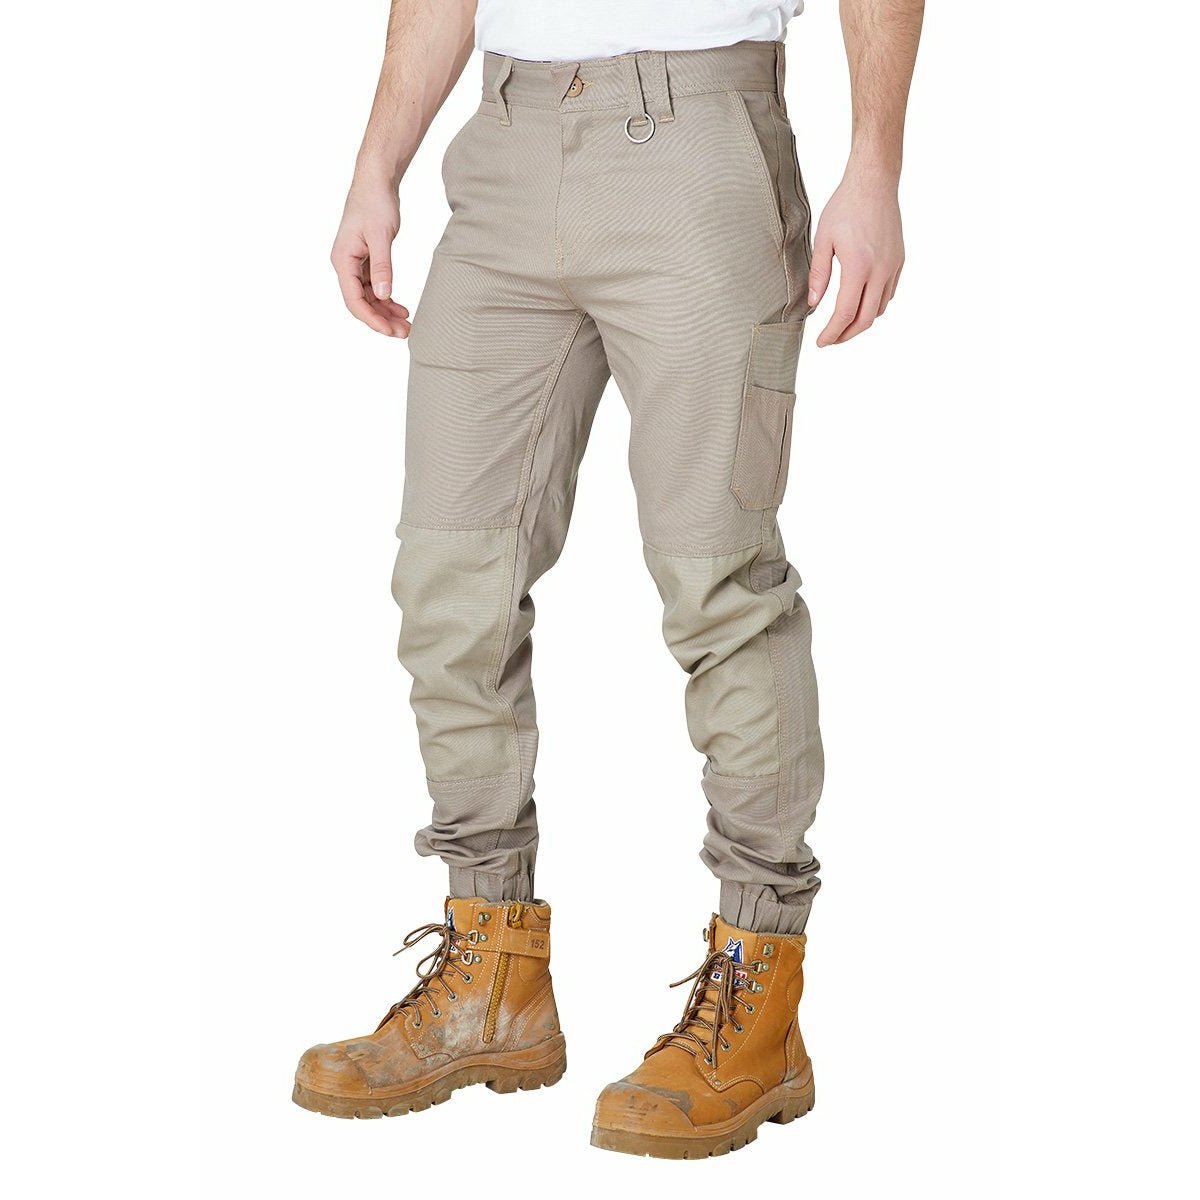 New Look Cotton Cuffed Cargo Trousers  Stone  verycouk